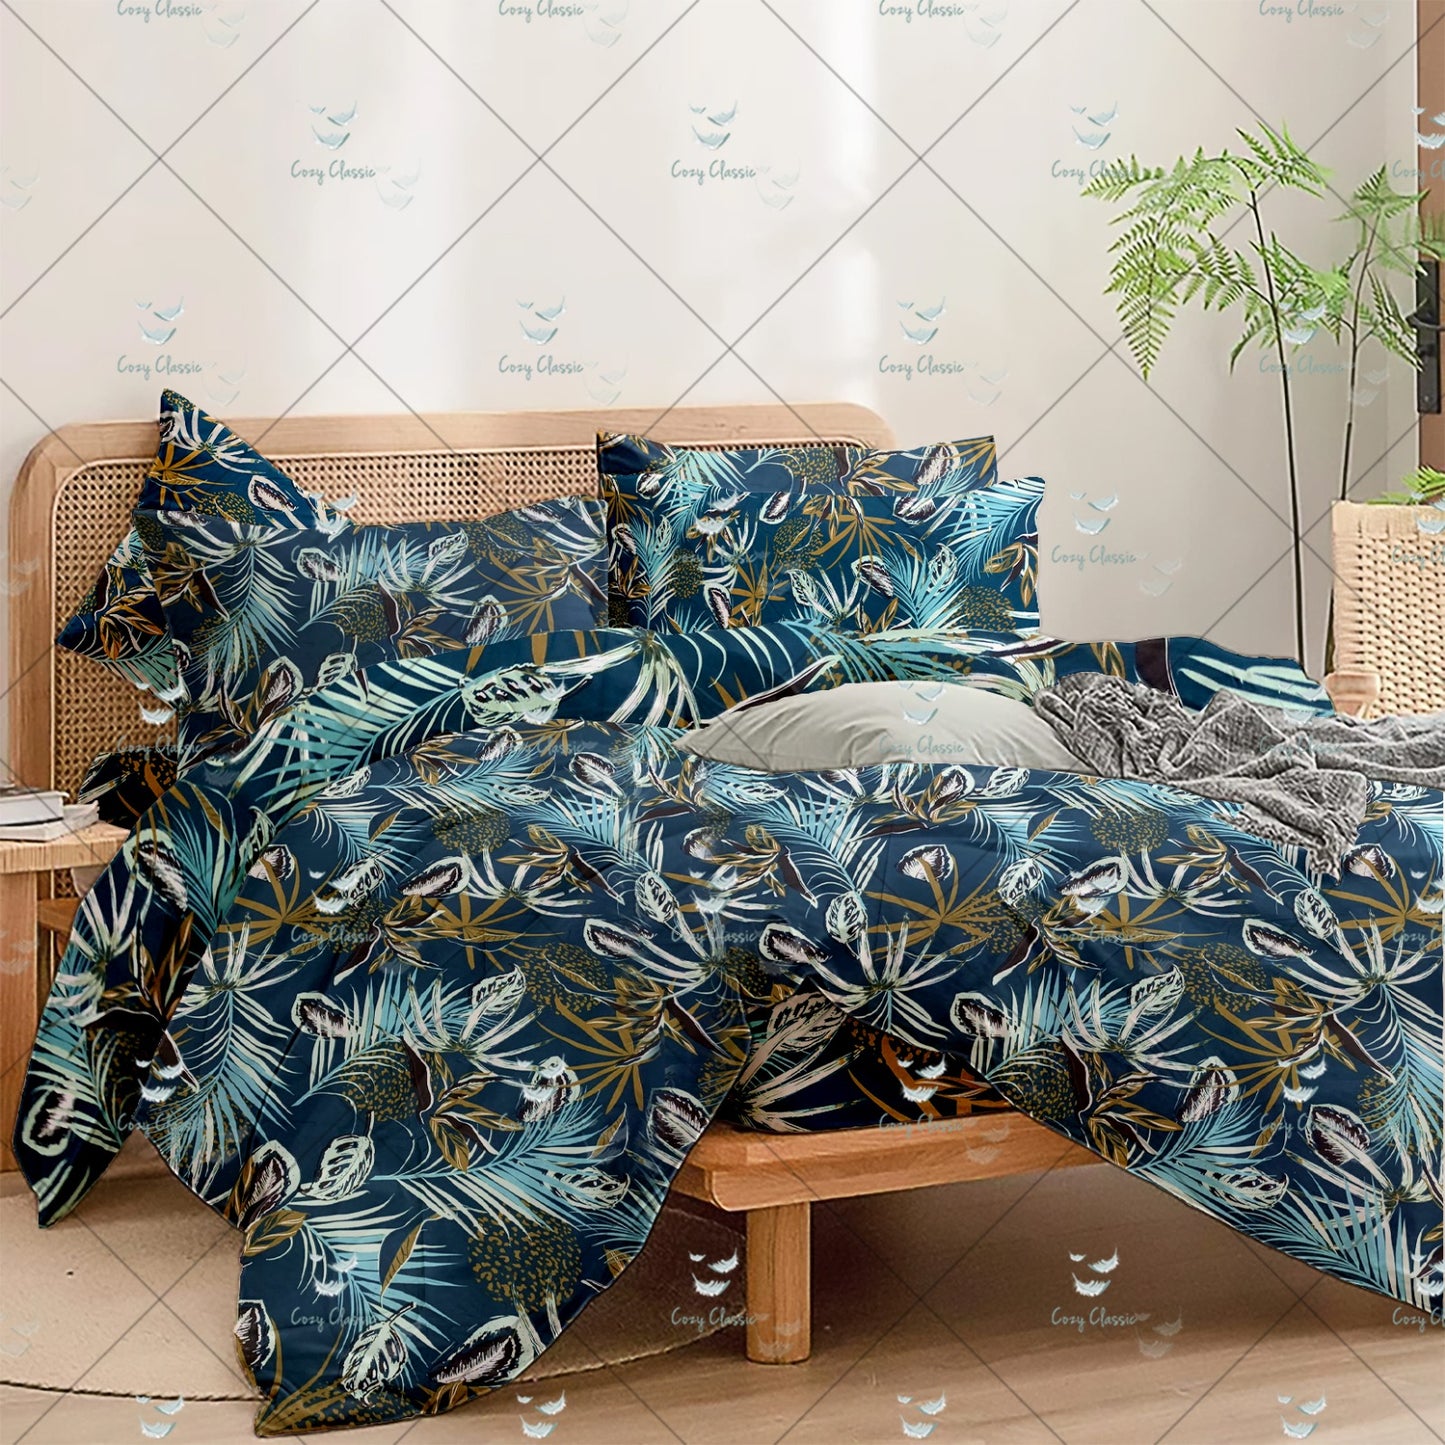 Sea Sapphire Feathers bedding Sets